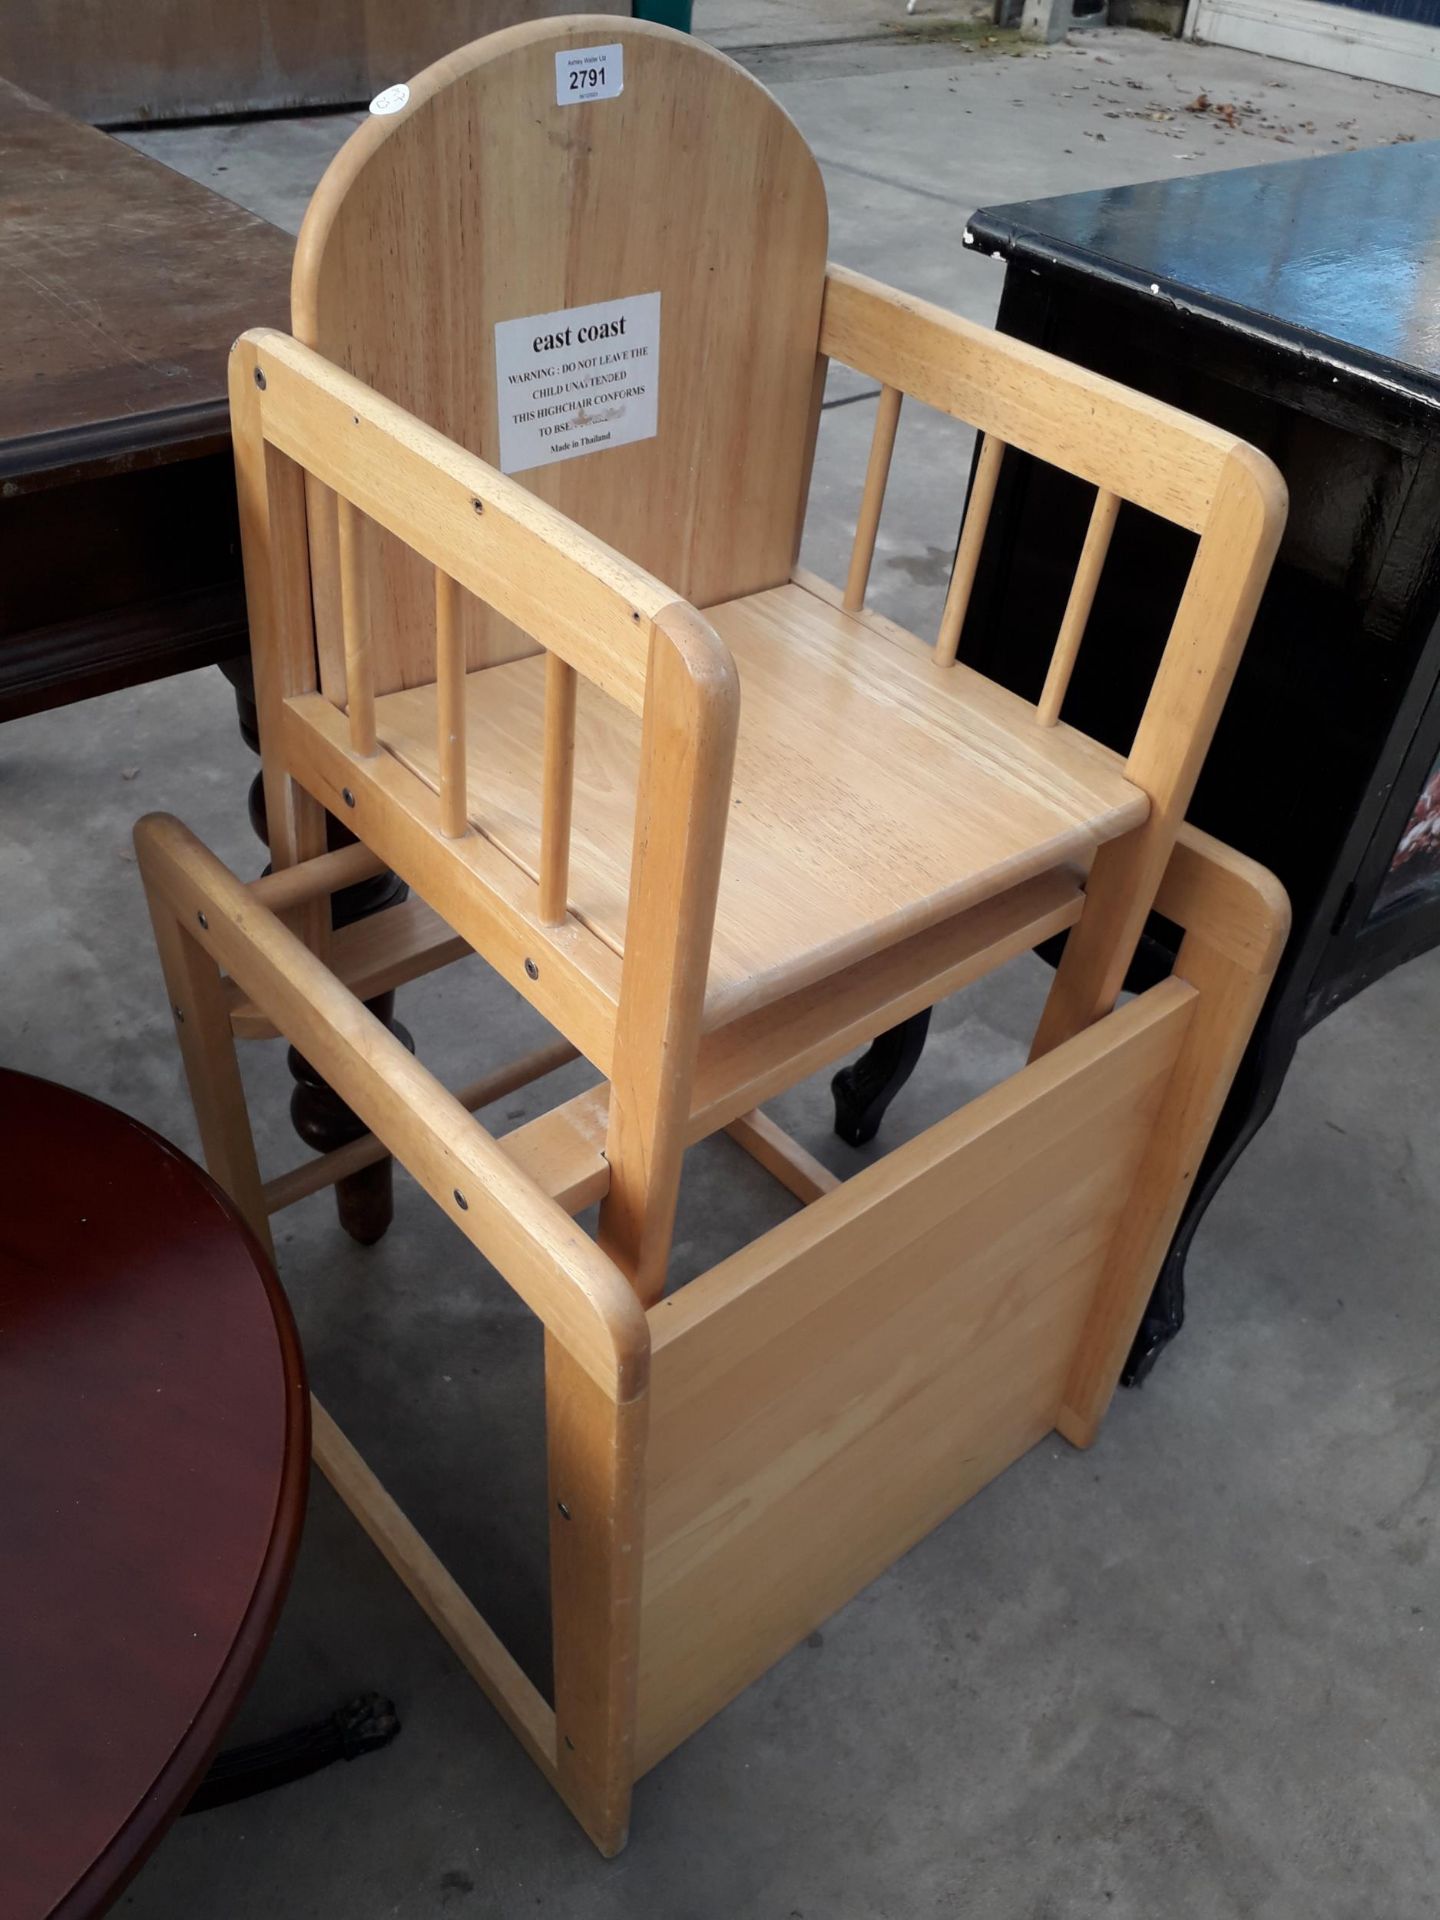 A MODERN EAST COAST CHILDS HIGH CHAIR - Image 2 of 2